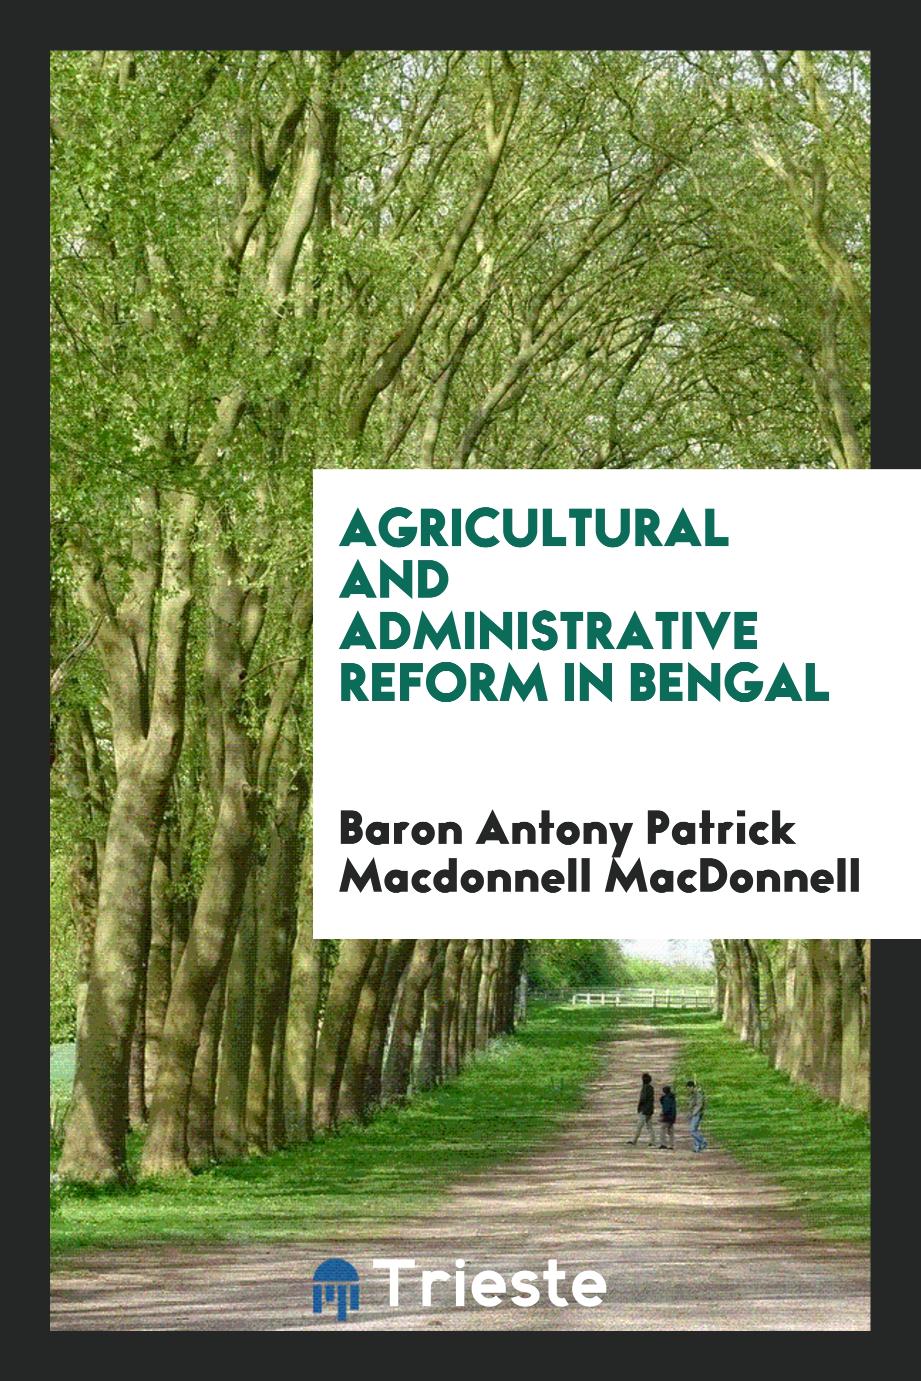 Agricultural and administrative reform in Bengal